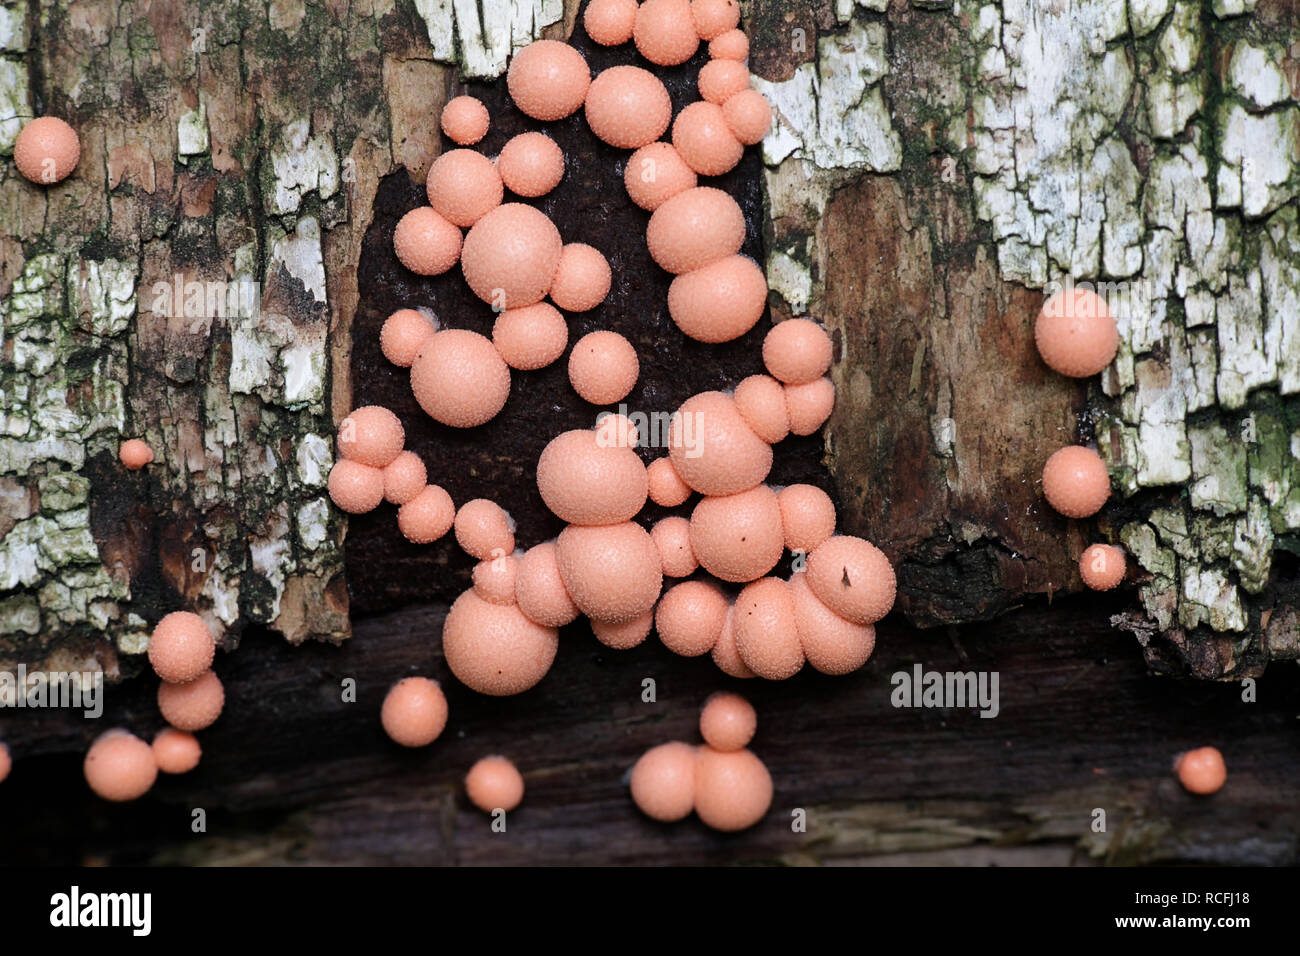 Lycogala epidendrum, commonly known as wolf's milk or groening's slime mold Stock Photo